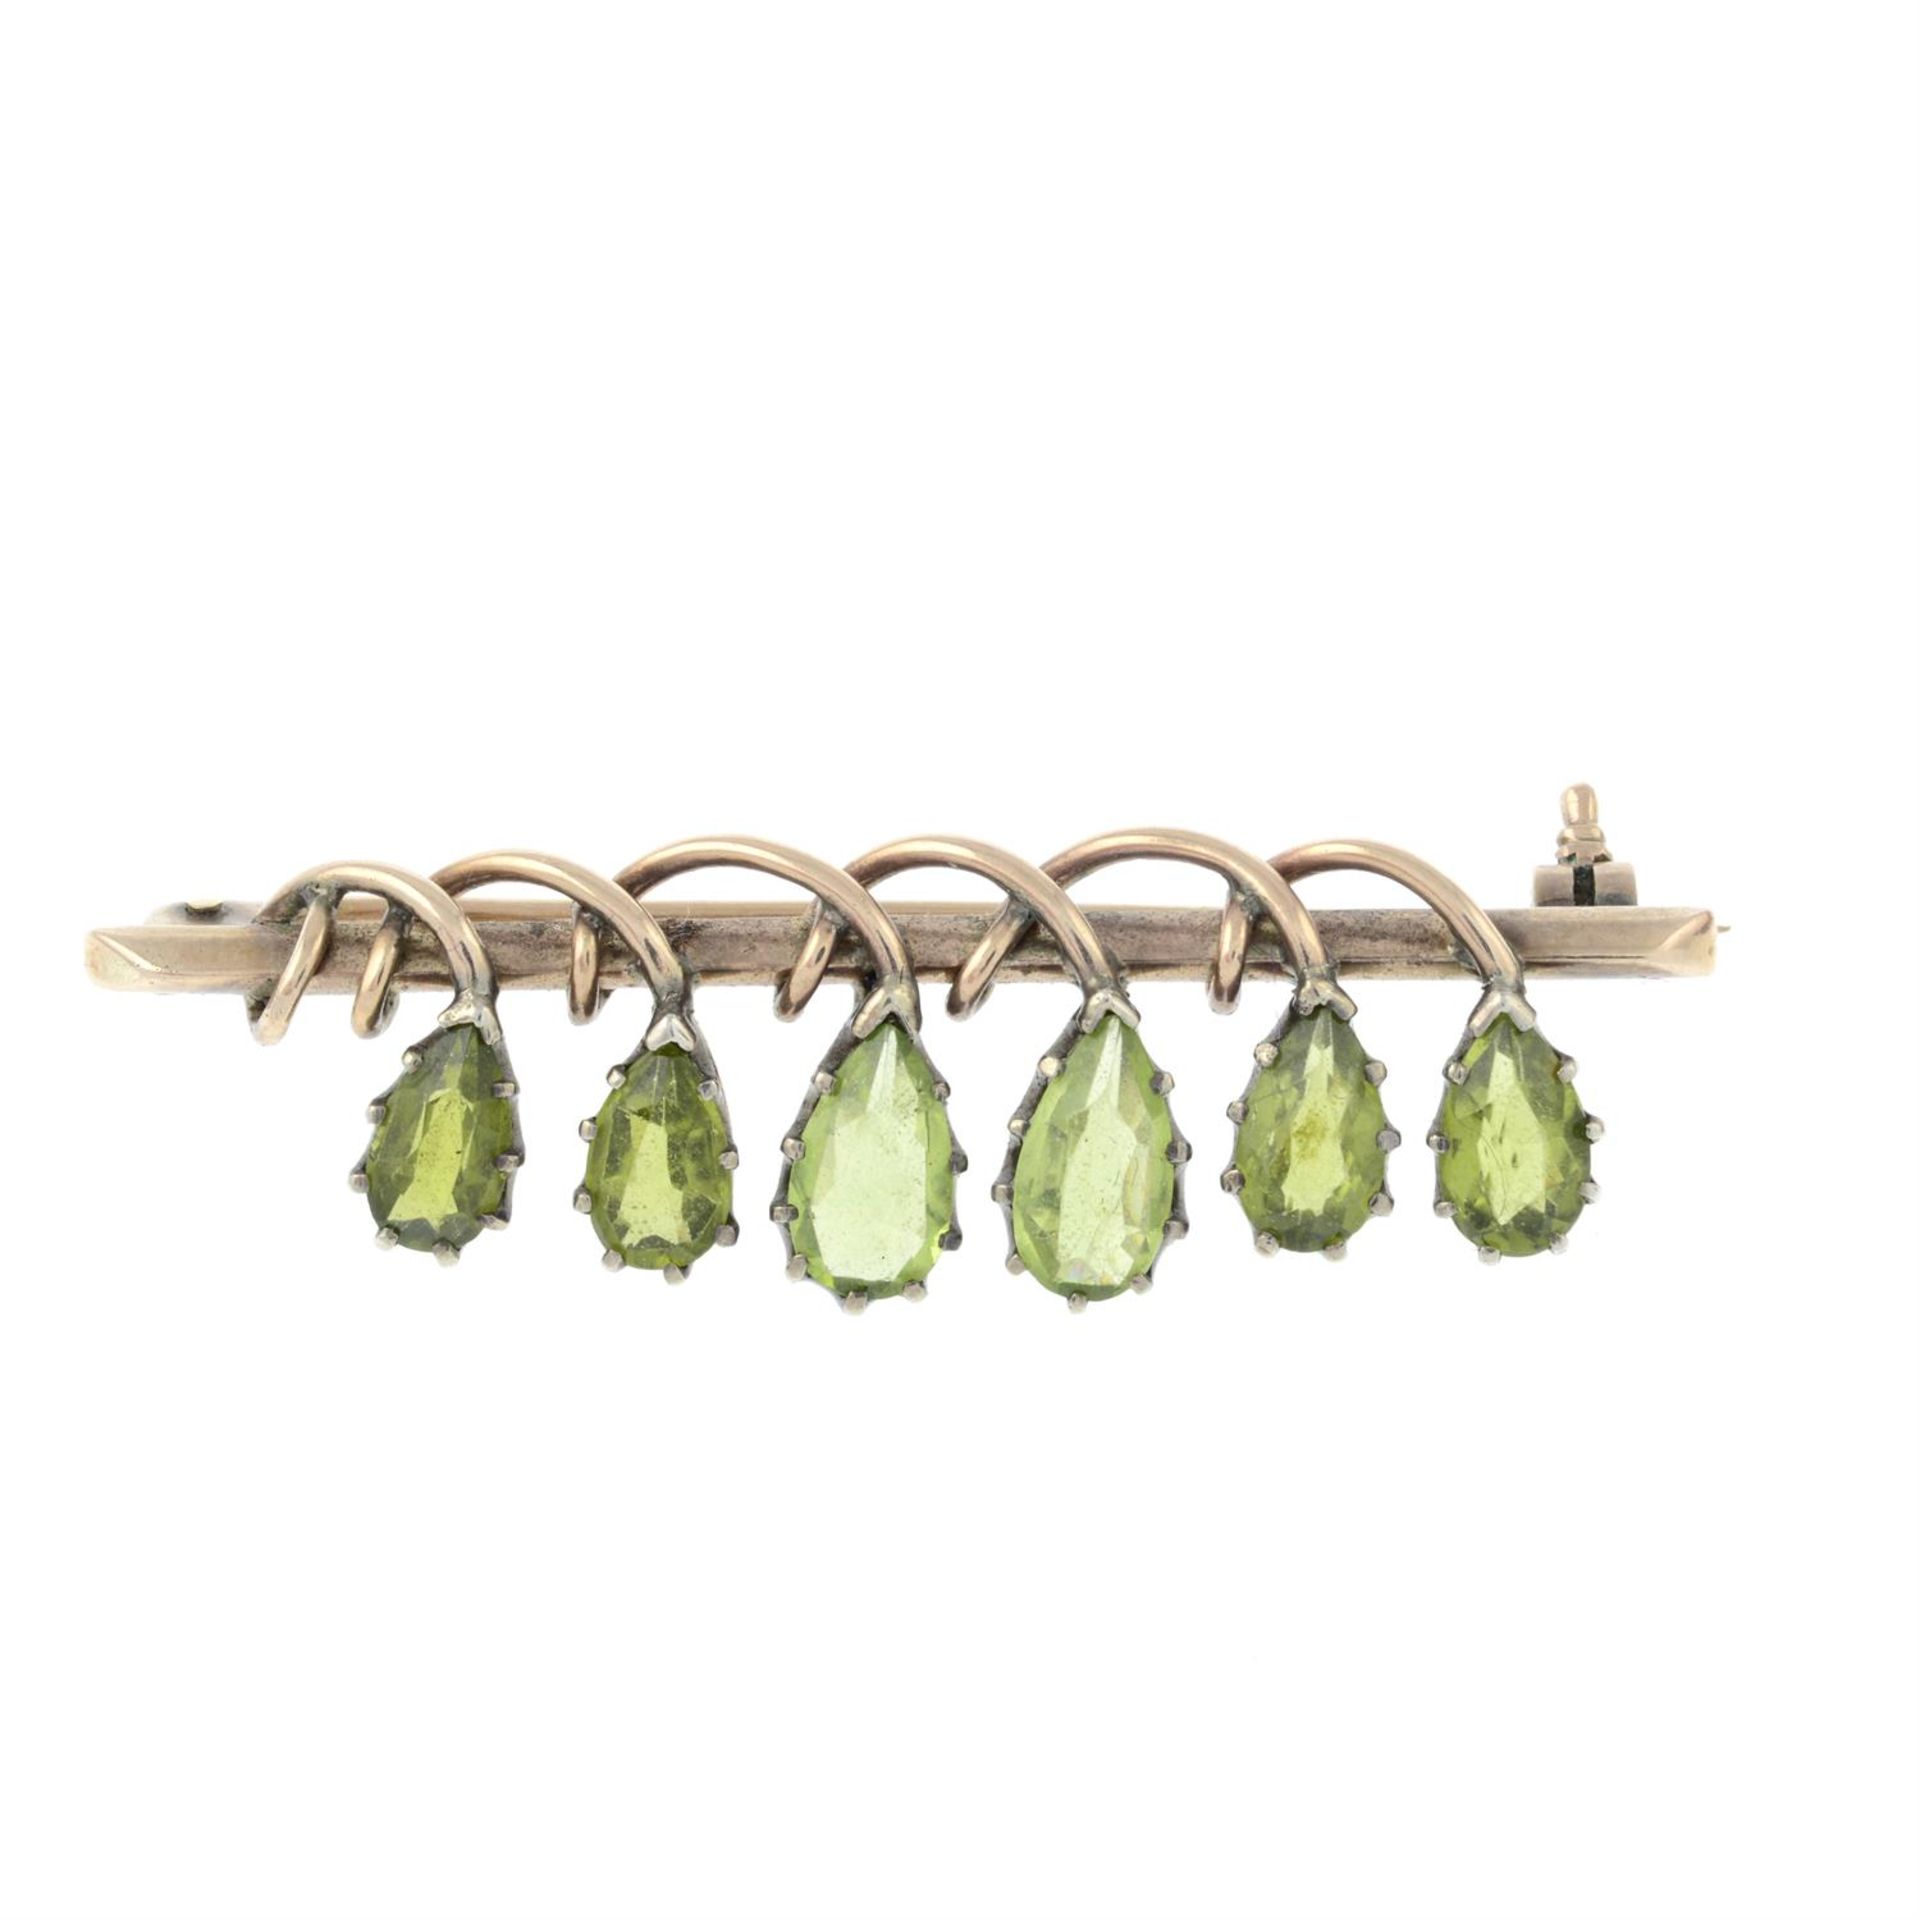 An Arts and Crafts peridot brooch, attributed to Dorrie Nossiter.